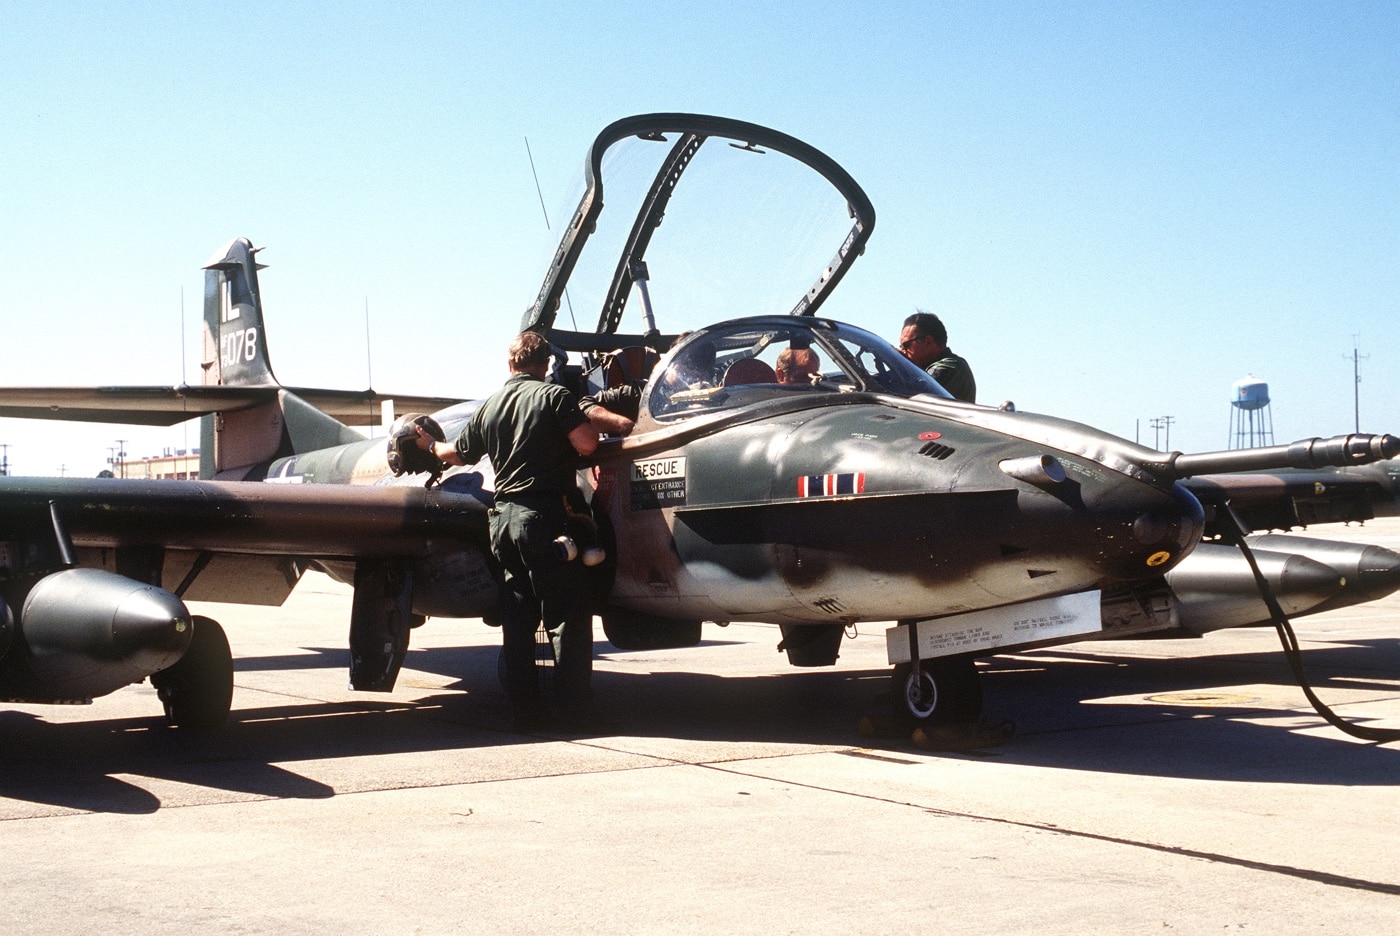 In this photograph we see airmen of the United States Air Force preparing A-37s for a simulated interdiction combat mission in 1982. The List of United States Air Force squadrons operating the A-37 Dragonfly is short. This is a list of A-37B Dragonfly squadrons of the United States Air Force. Cessna Aircraft built a total of 577 A-37B's. The aircraft was used for a relatively short period by the USAF; however, many aircraft had long service lives flying for the Air Force Reserves and Air National Guard.